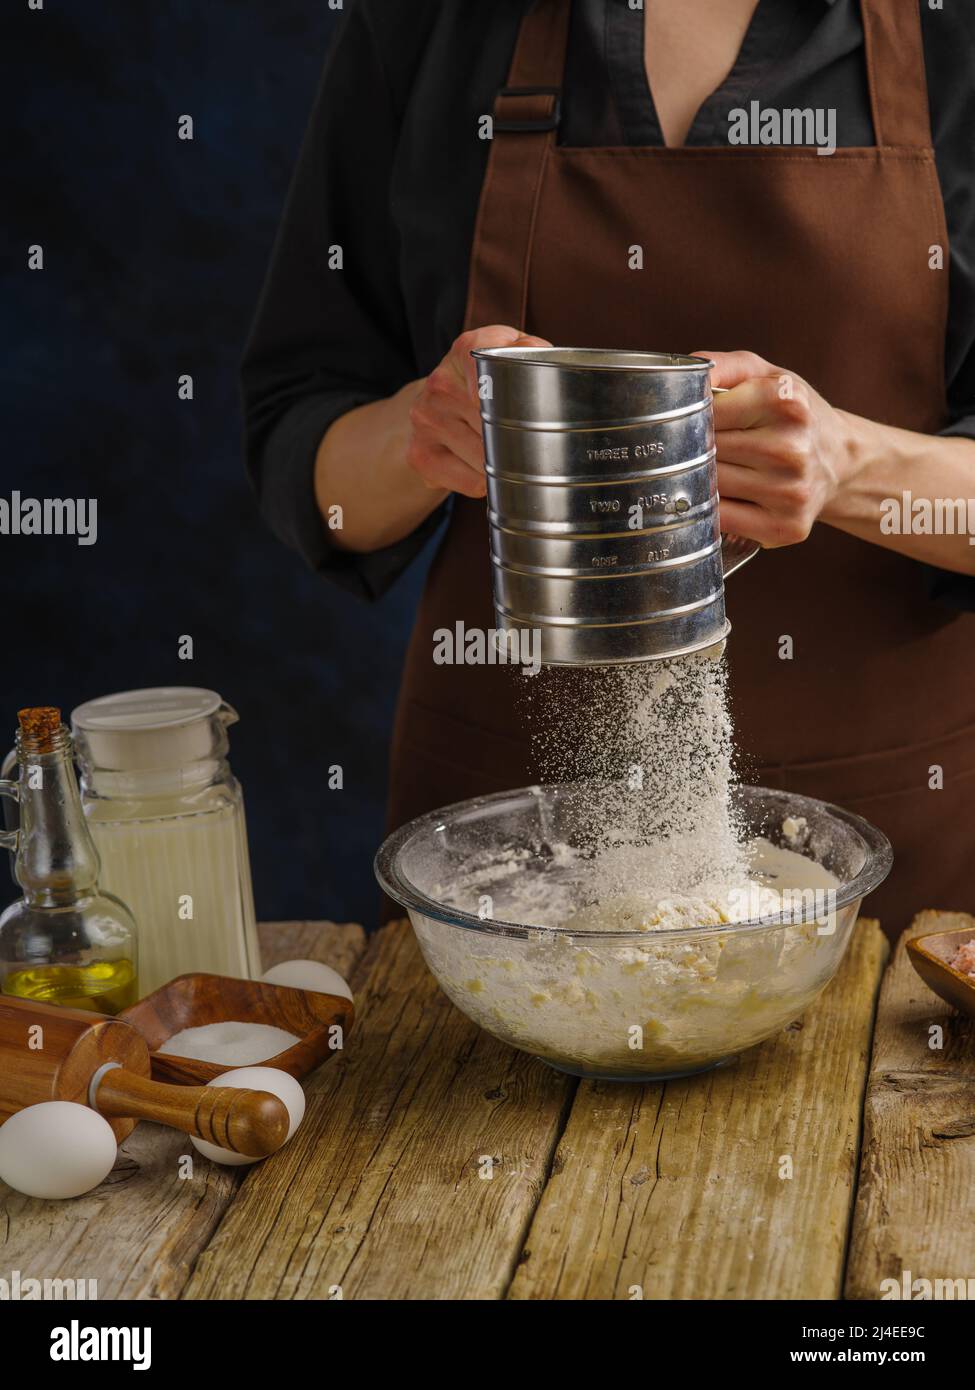 https://c8.alamy.com/comp/2J4EE9C/the-chef-prepares-the-dough-on-a-dark-background-sift-the-flour-through-a-sieve-into-a-large-glass-bowl-flour-in-frozen-flight-recipes-for-dough-pr-2J4EE9C.jpg